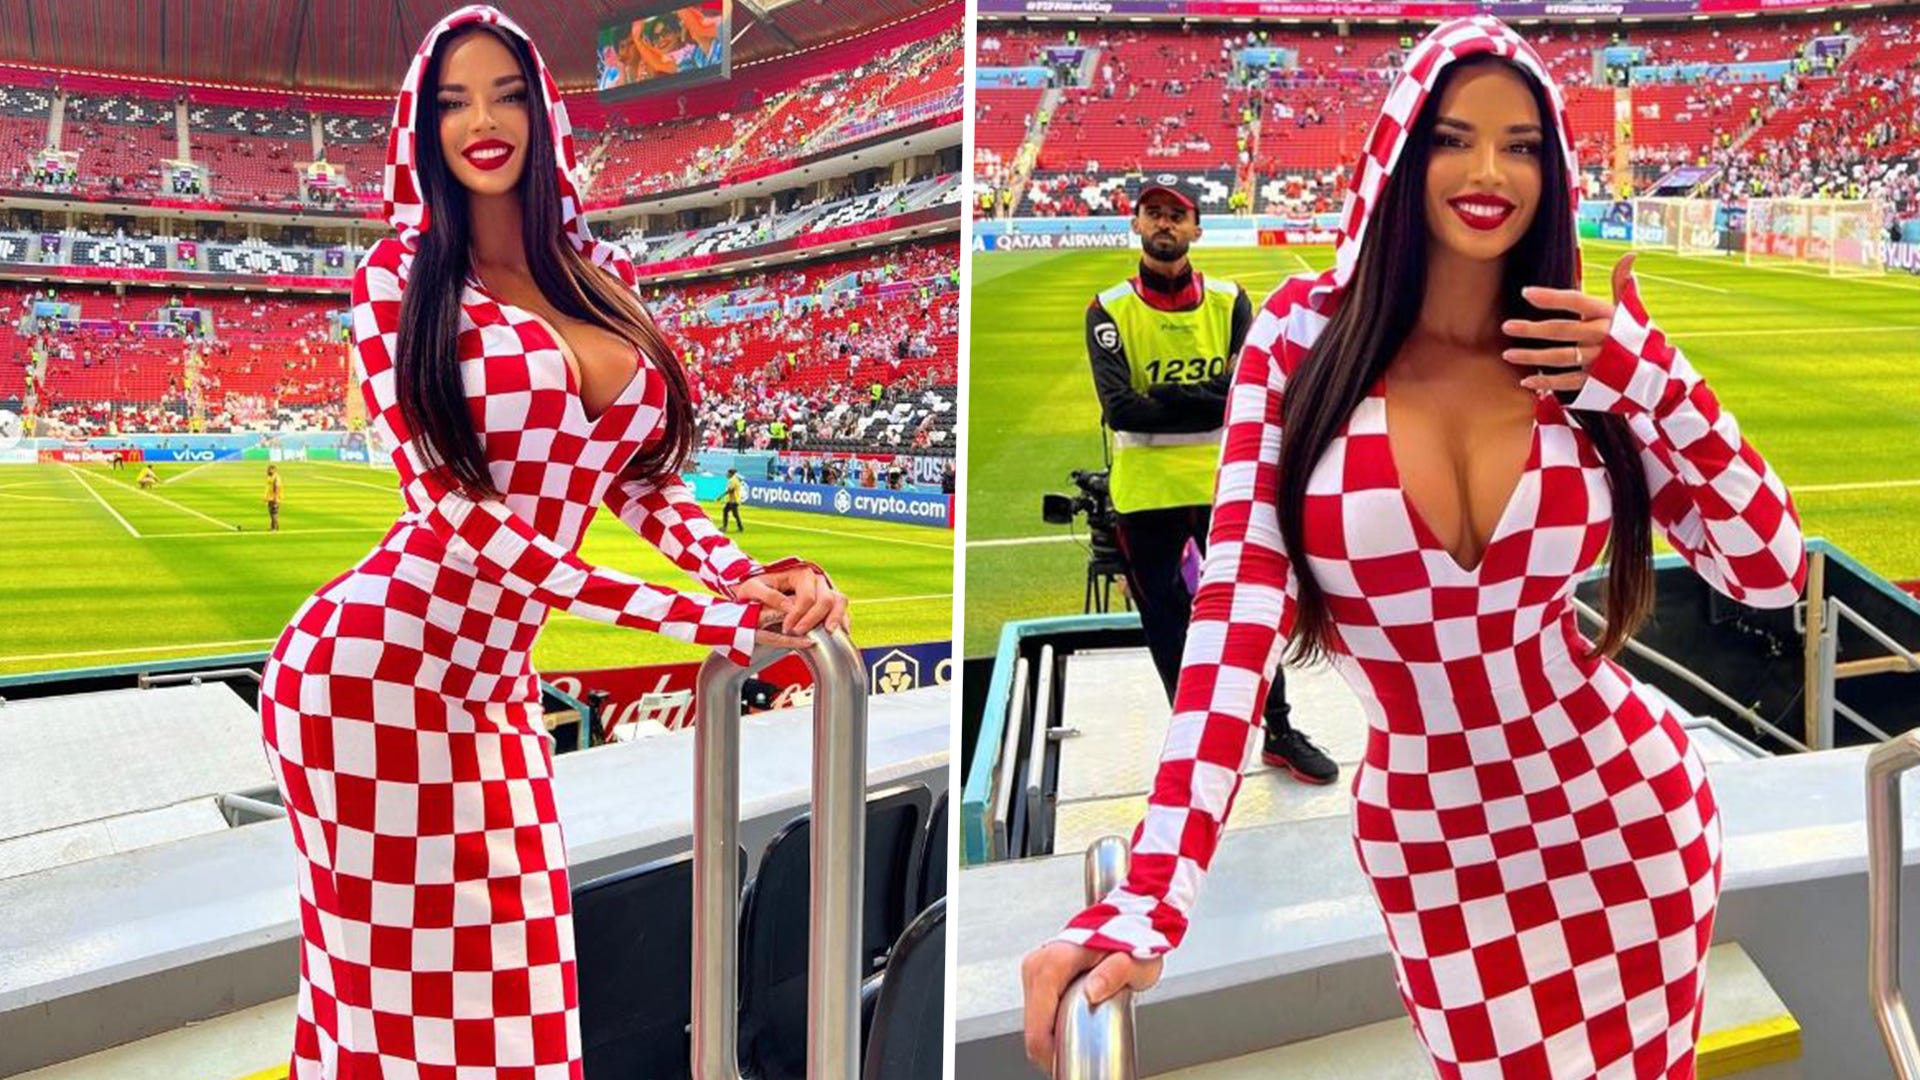 Croatian Instagram model Ivana Knoll risks breaking Qatar decency laws &  causing huge offence for wearing racy World Cup outfits | Goal.com